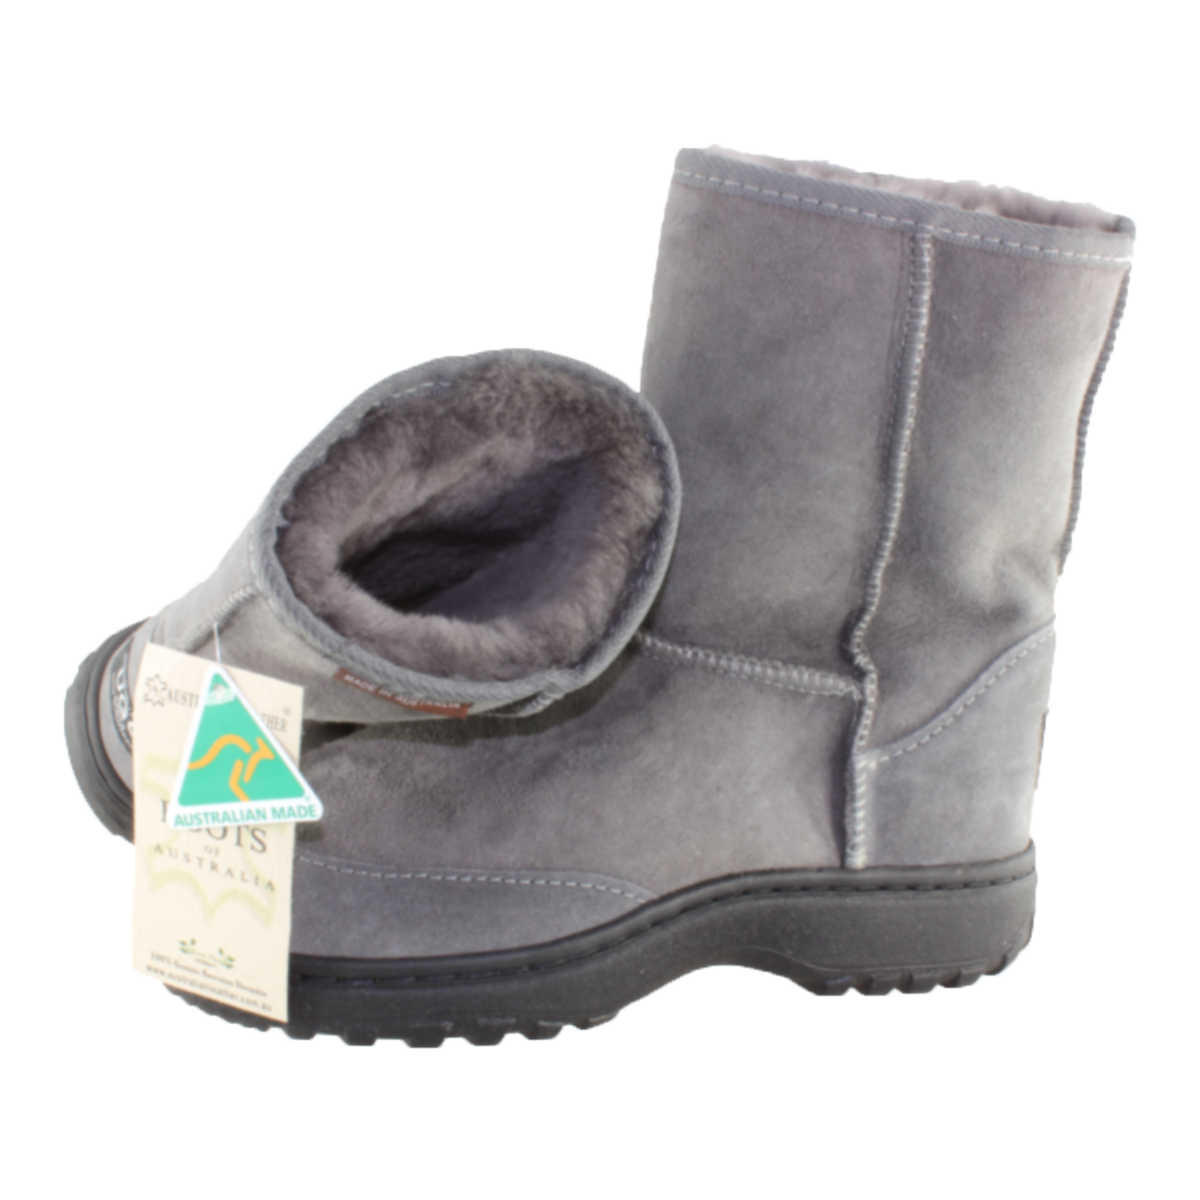 Australian Made Ugg Boots Classic Short Grey Colour with Rubber sole Mens & Women